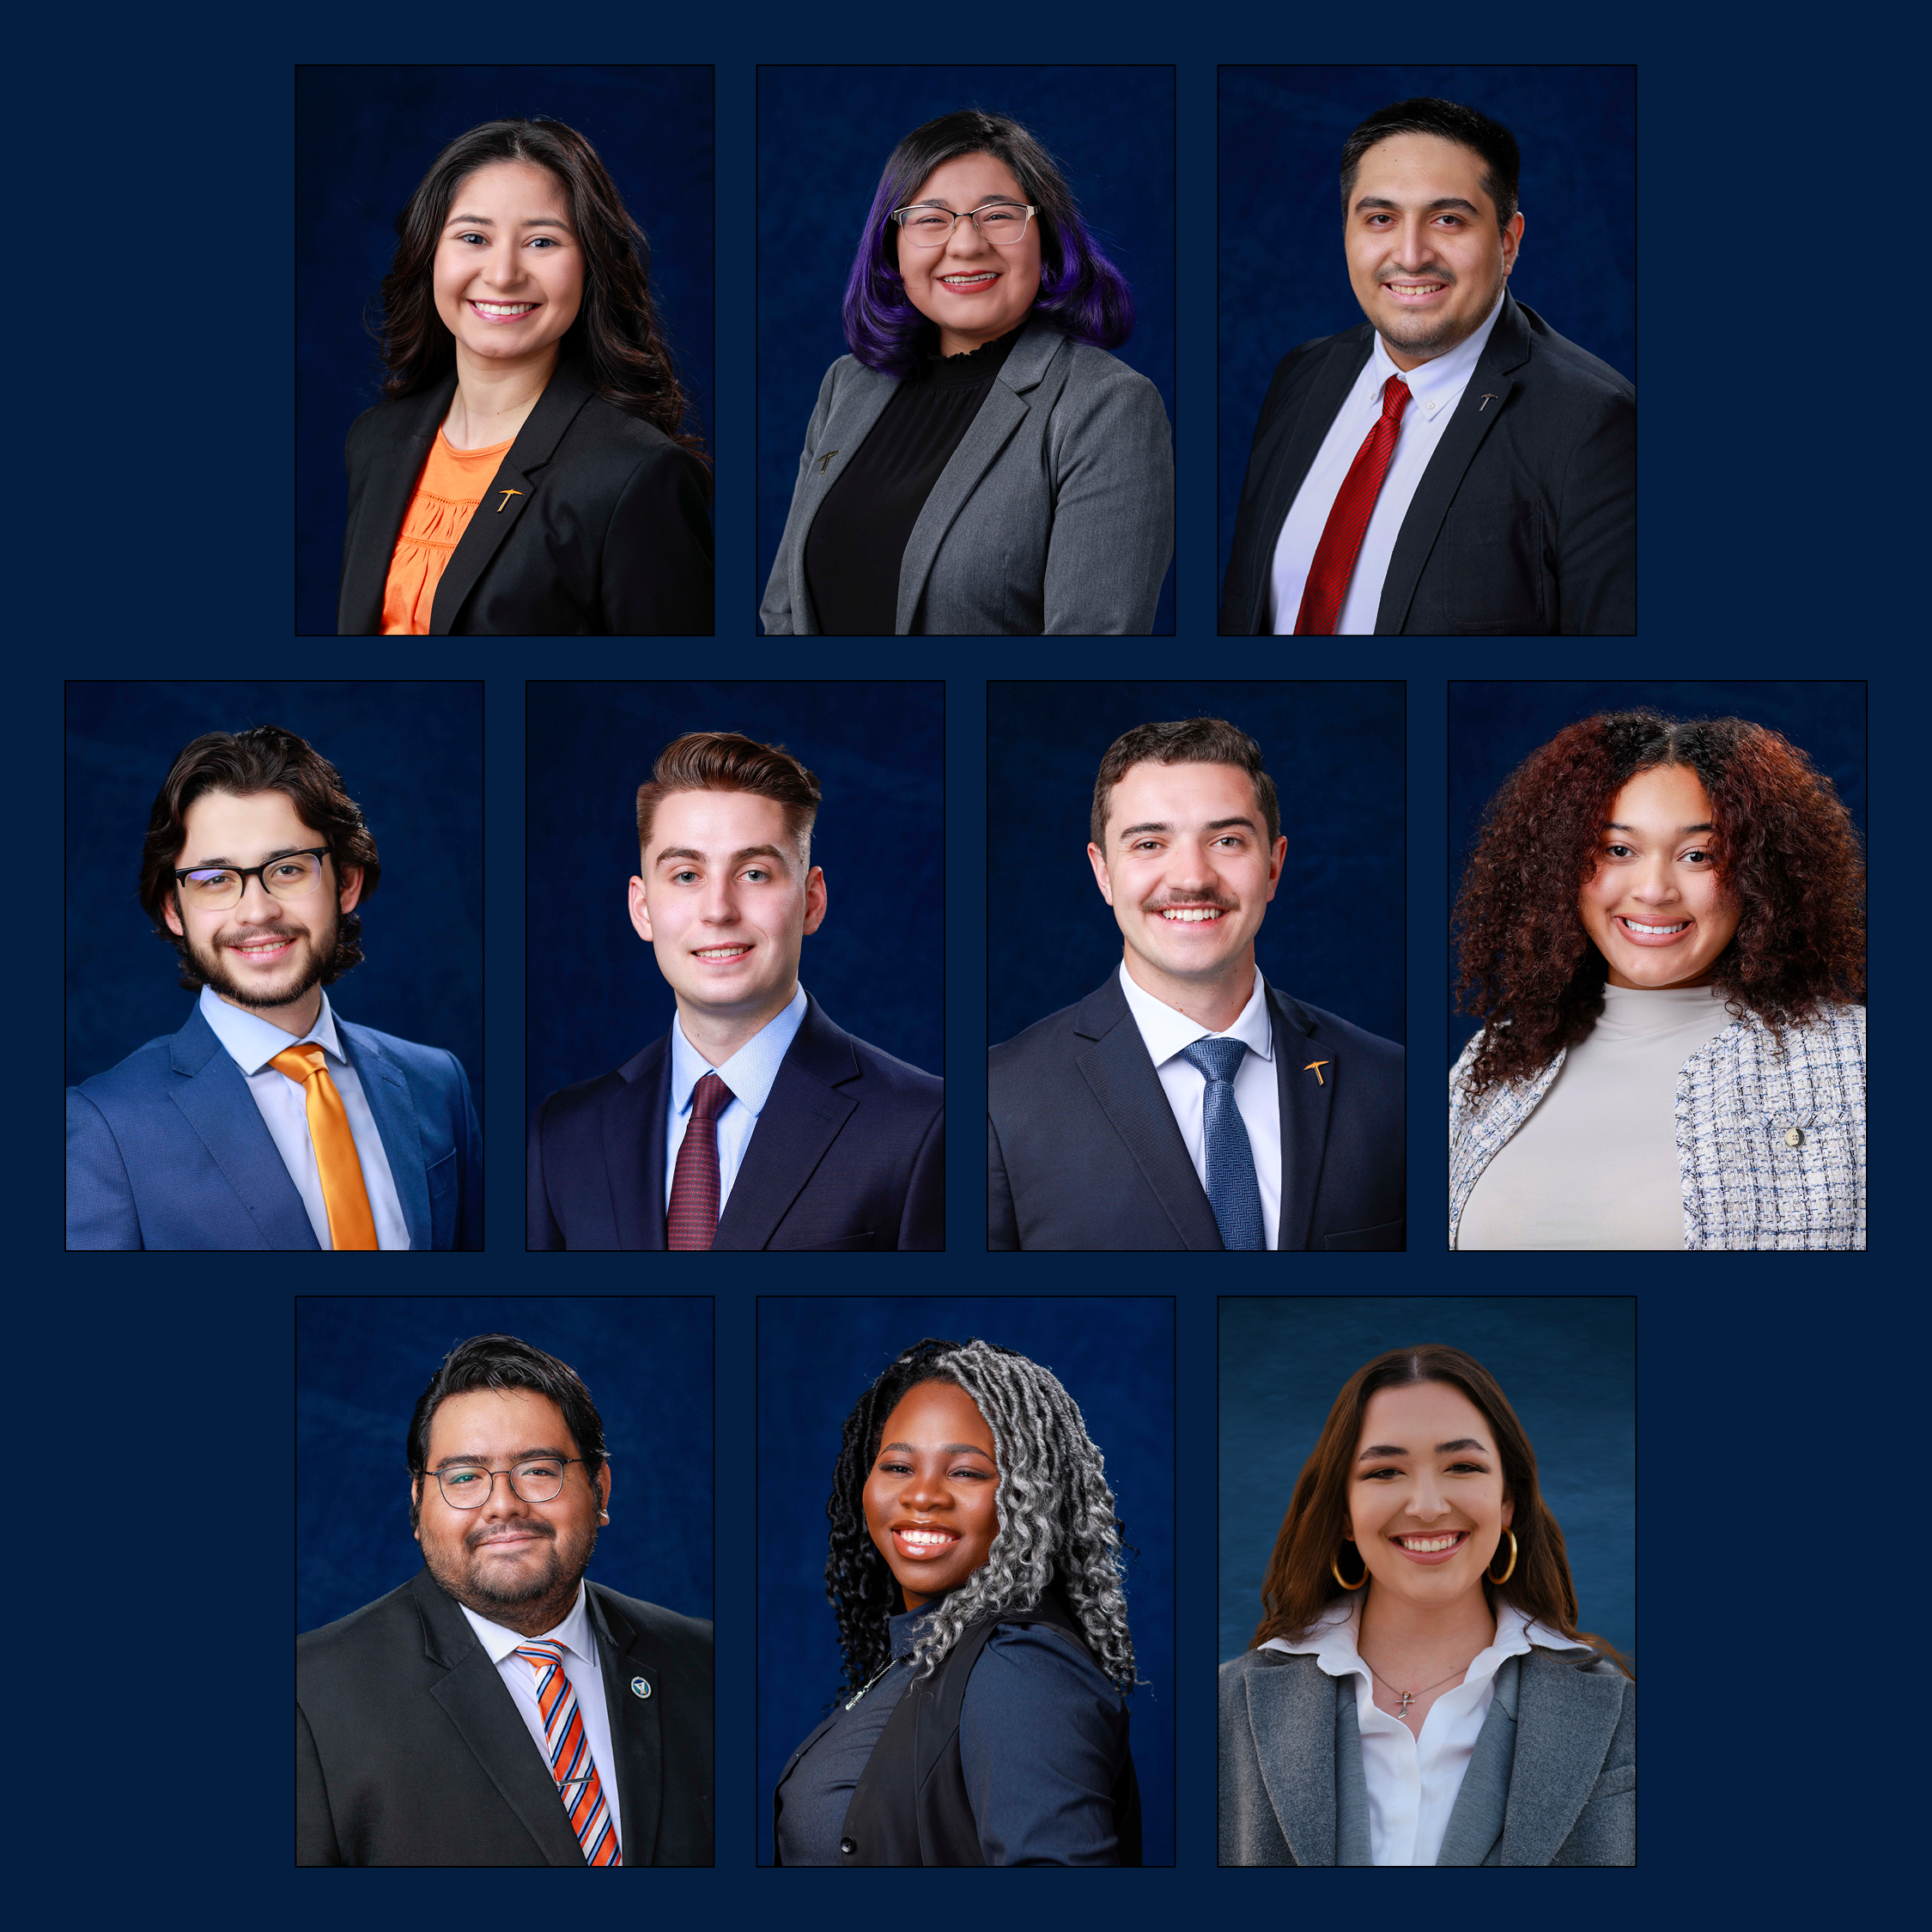 The Top Ten Seniors Awards are presented annually by The University of Texas at El Paso Alumni Association to a group of outstanding future alumni. Top row from left: Kennedy Trevino, Frida Garcia-Ledezma and Brian Rodiles Delgado. Middle row from left: Zachary Althoff, Benjamin Shipkey, Maximilian Rothblatt and Amira Williams. Bottom row from left: Michael Gutierrez, Abeni Merriweather and Zoe Andritsos.  